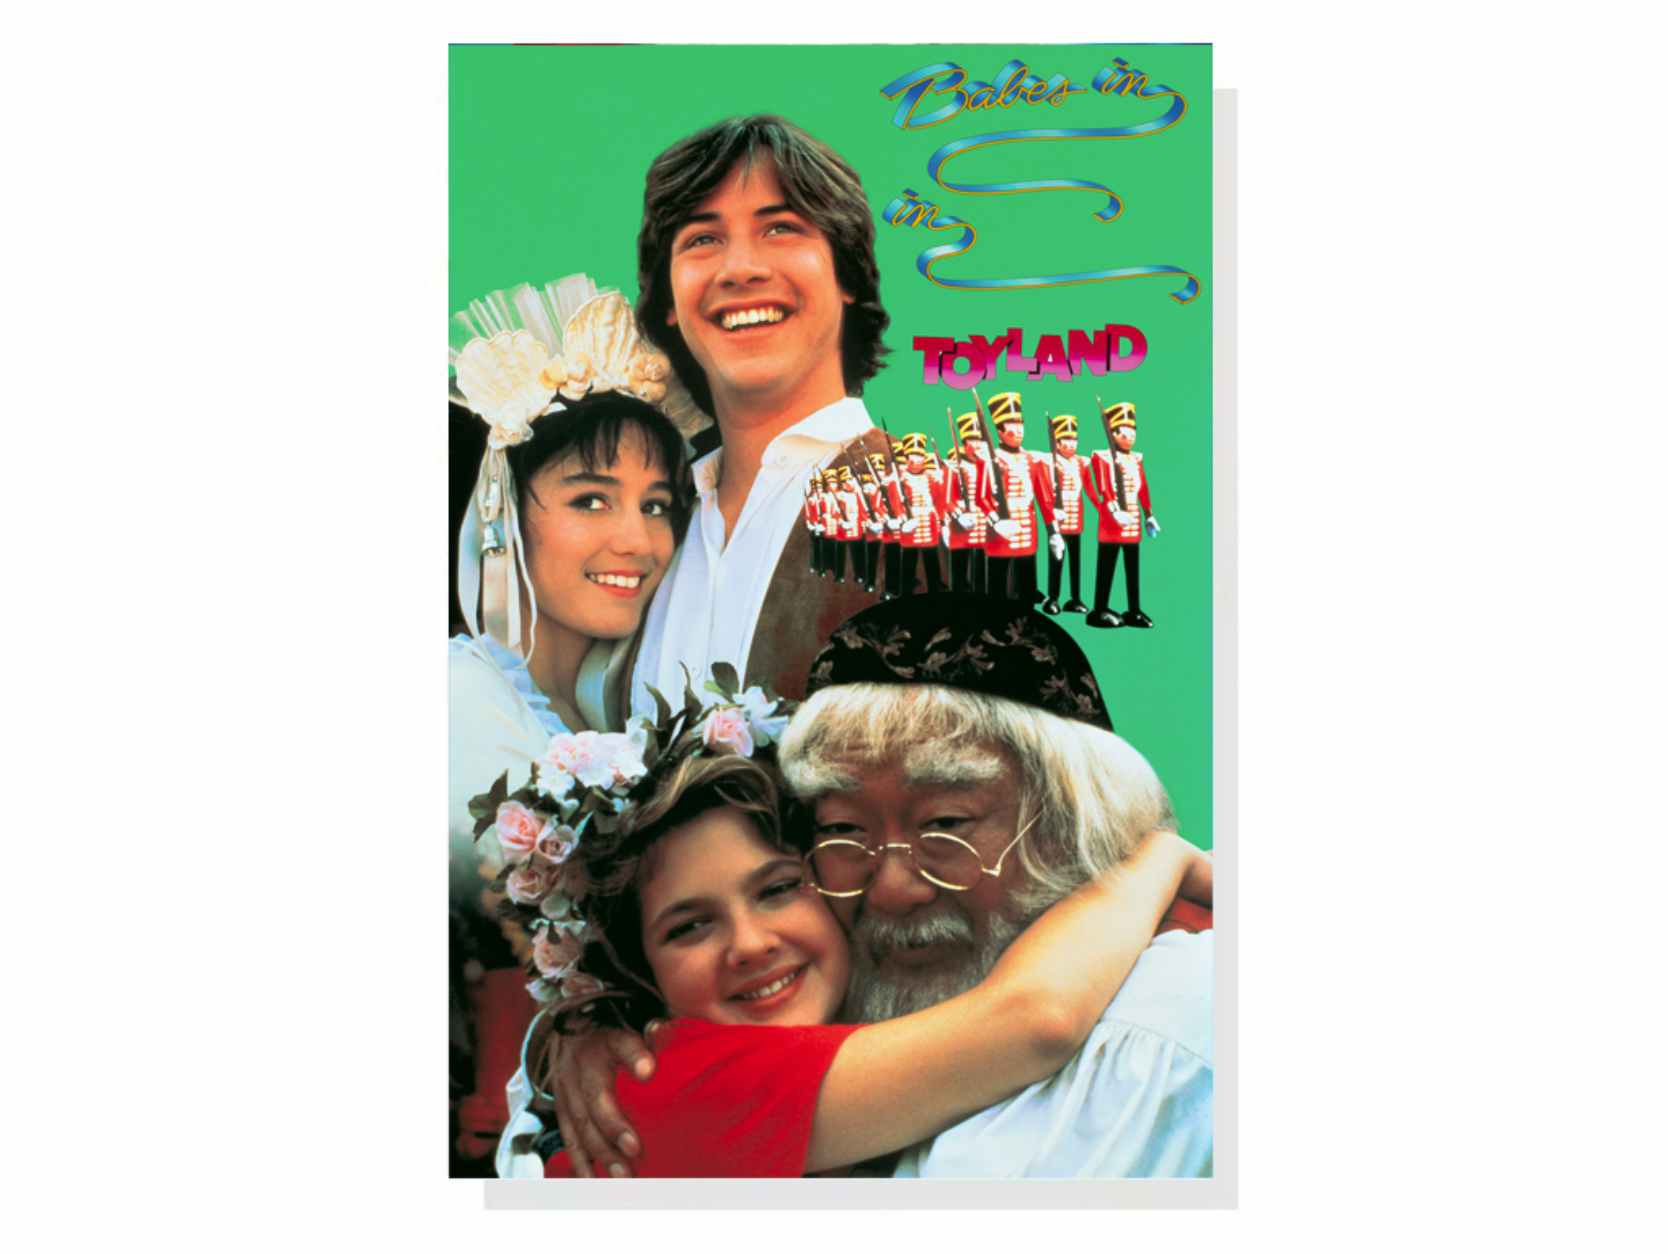 Movie poster for Babes in Toyland, one of the best Christmas movies on Disney Plus.